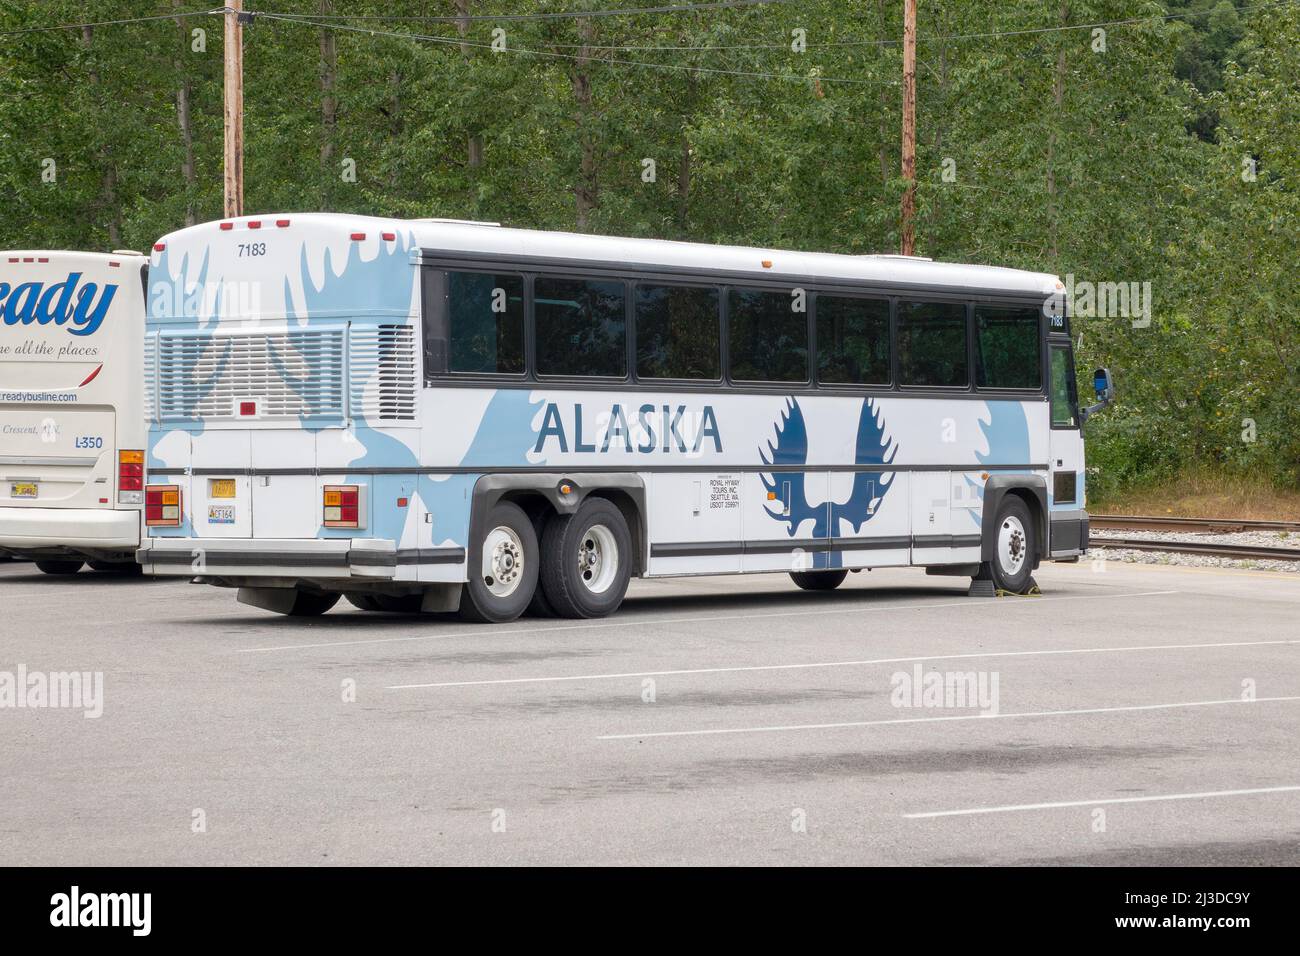 Alaska Tour Bus Parked In Juneau Alaska Operated By Royal Hyway Tours, Has Moose Antlers Branding Owned By Carnival Cruise Lines. Stock Photo